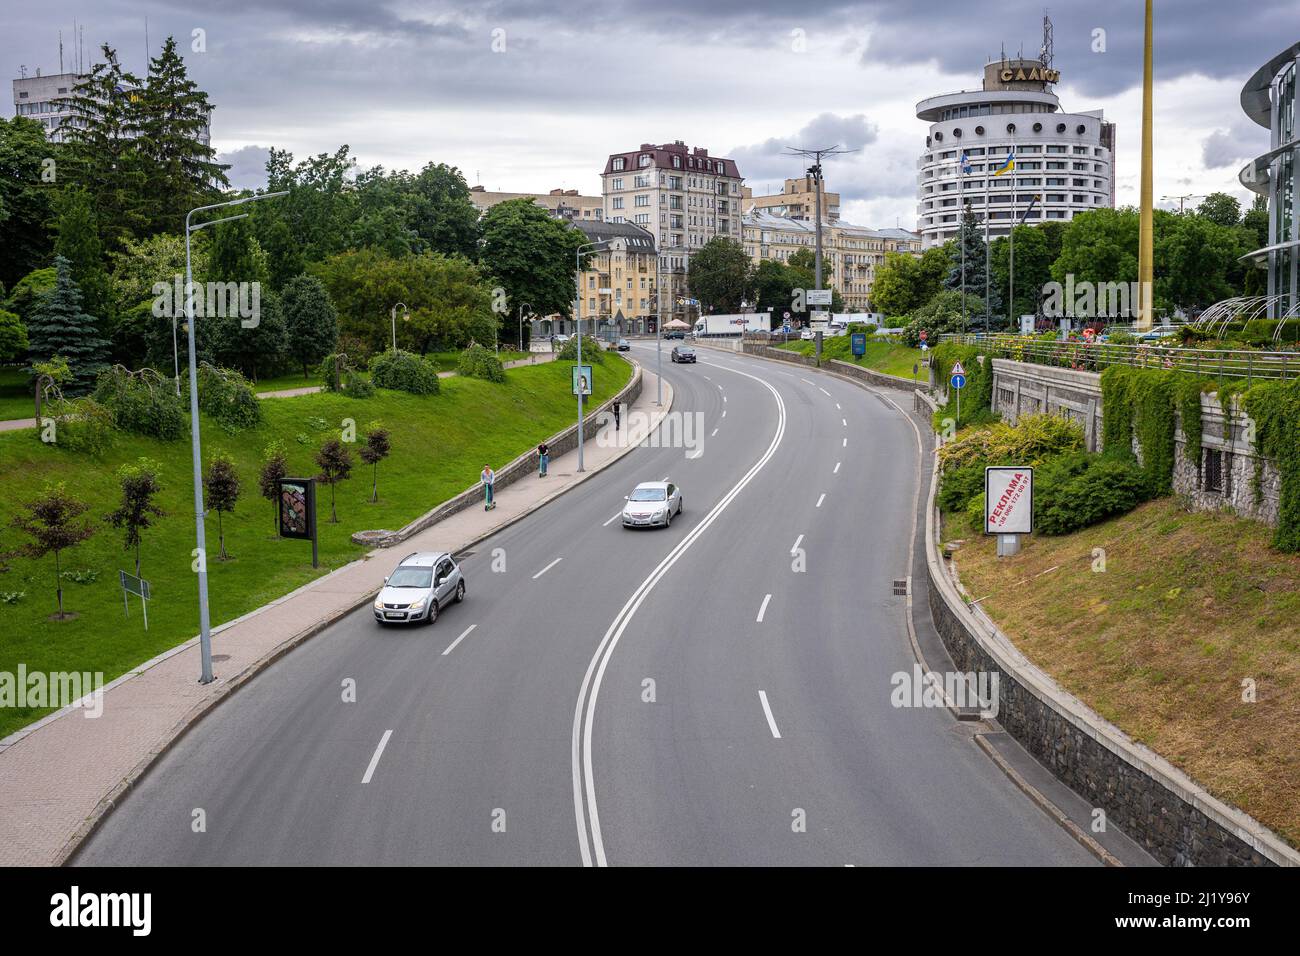 KYIV, UKRAINE - July 16, 2021: KYIV, UKRAINE - July 16, 2021: Parks on the slopes of the Dnieper in Pechersk above the Dnieper Descent. Hotel Salut. A Stock Photo